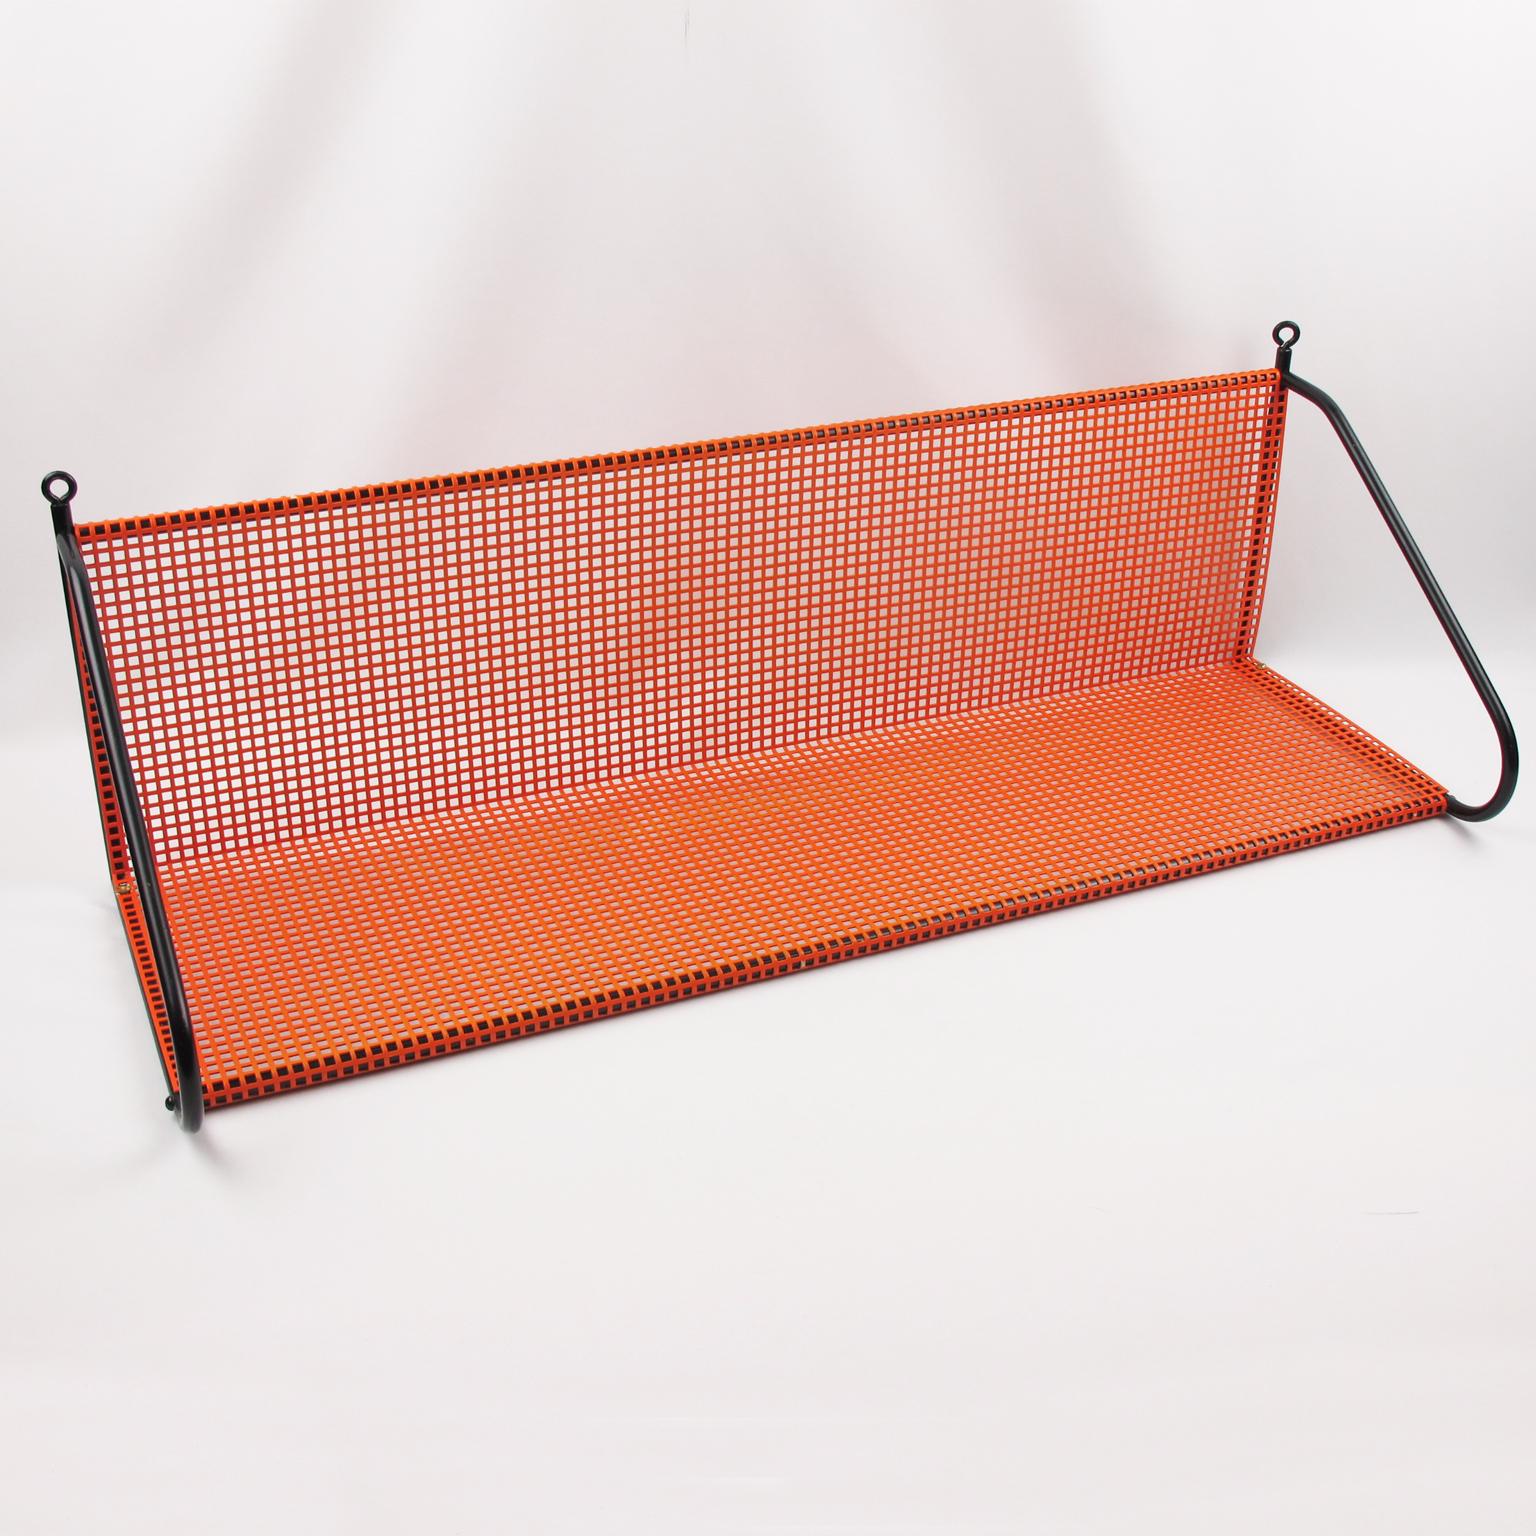 Unusual second half of the 20th century modernist metal shelving unit in the manner of French designer Mathieu Matégot. A striking example of French 1950s metalwork. Folded, perforated orange lacquered metal with black metal support.
Measurements: